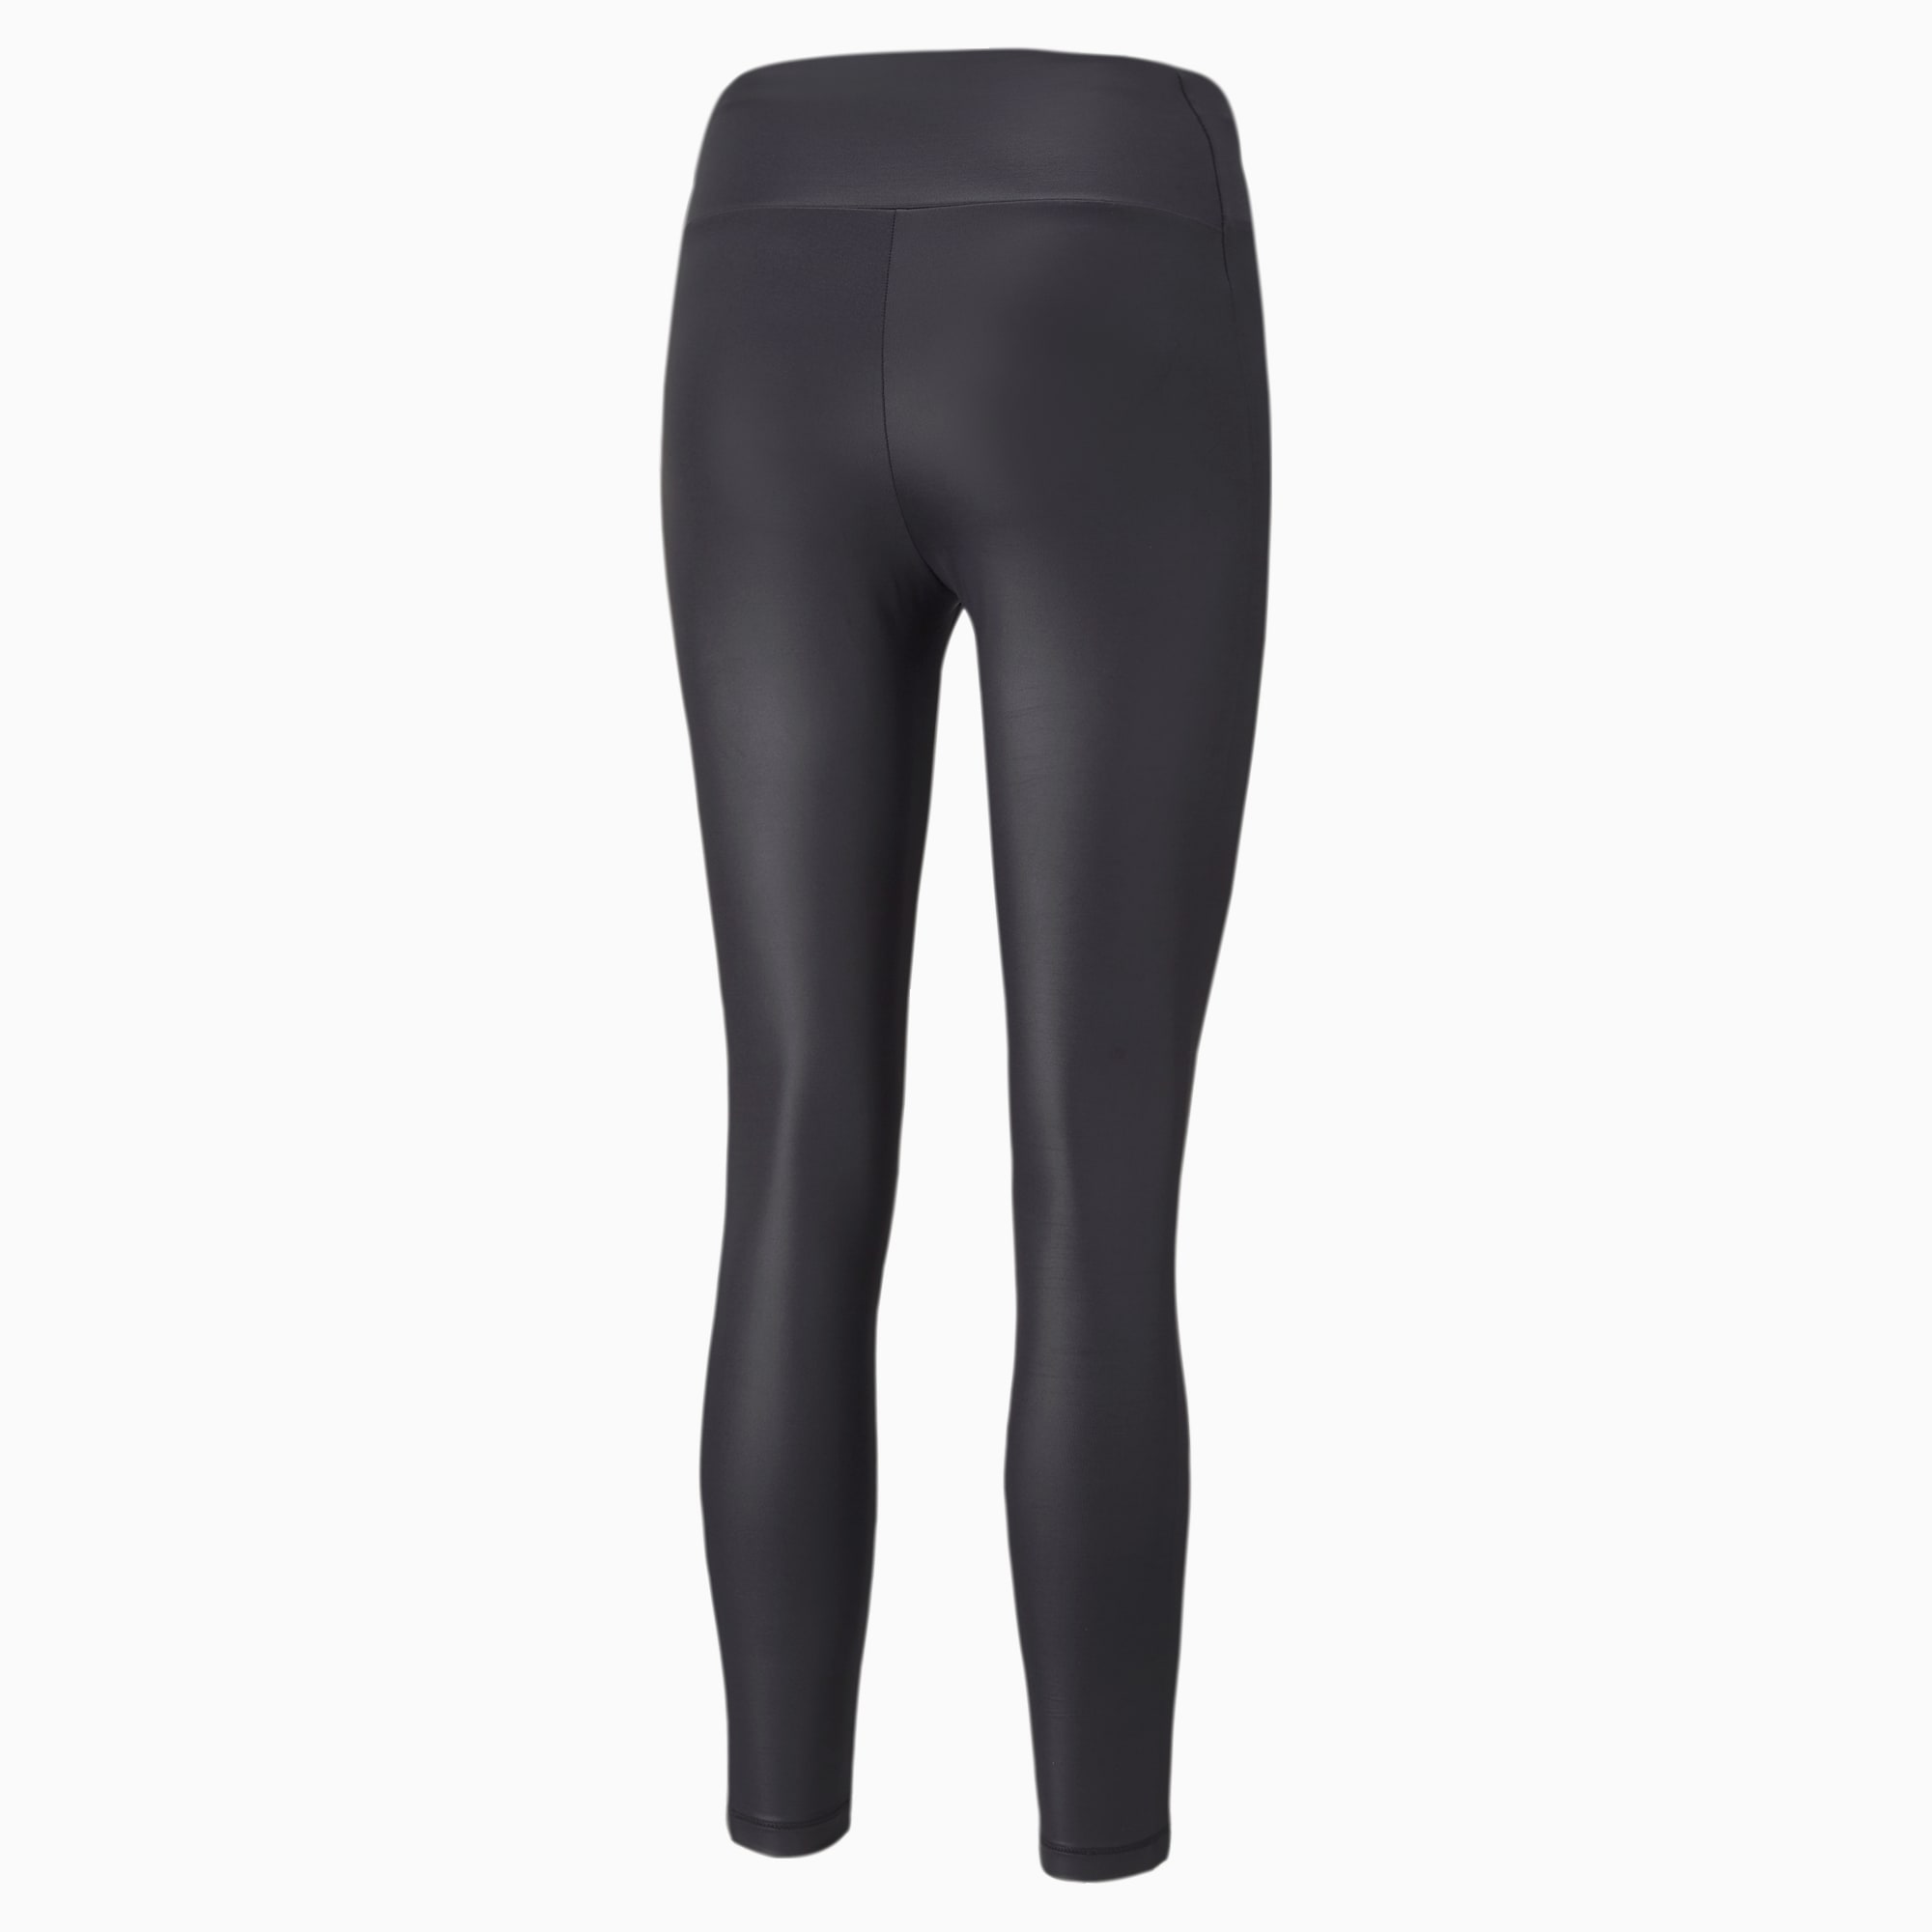 PUMA Women's Recharge Poly Pocket Tight Leggings NWT Aubergine SIZE: LARGE